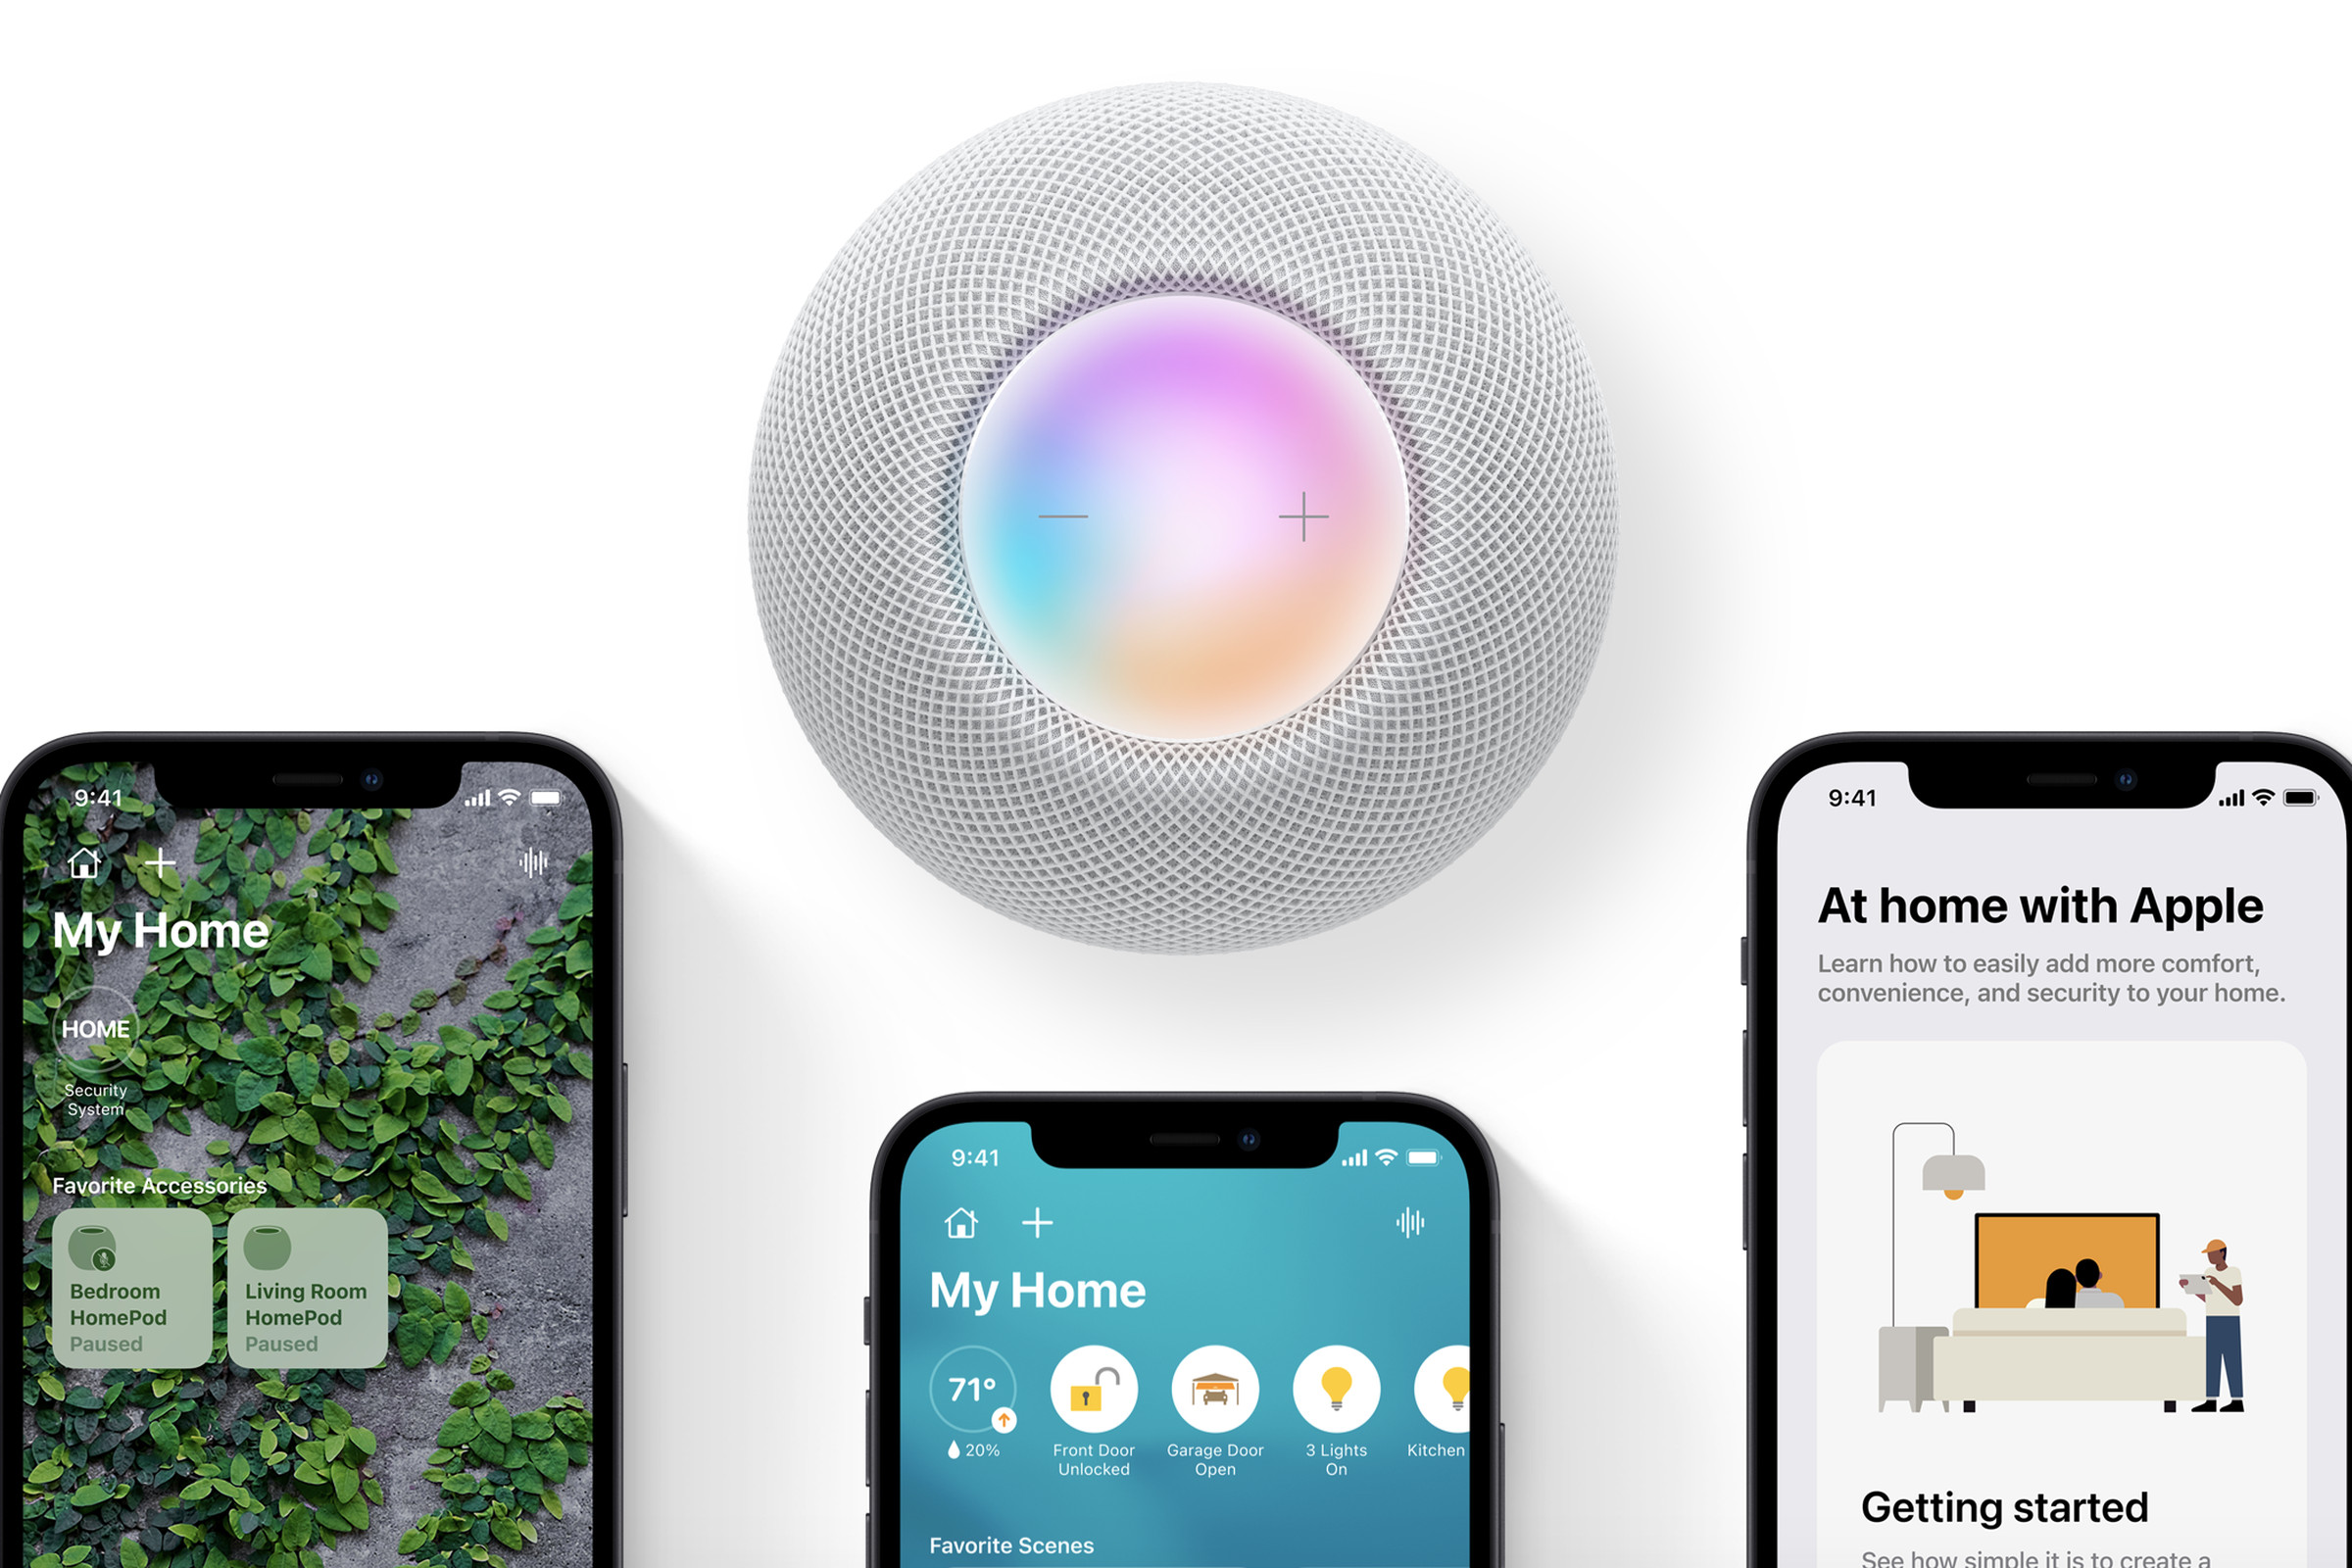 A slew of software updates next week will bring more functionality to Apple’s HomeKit smart home platform. 